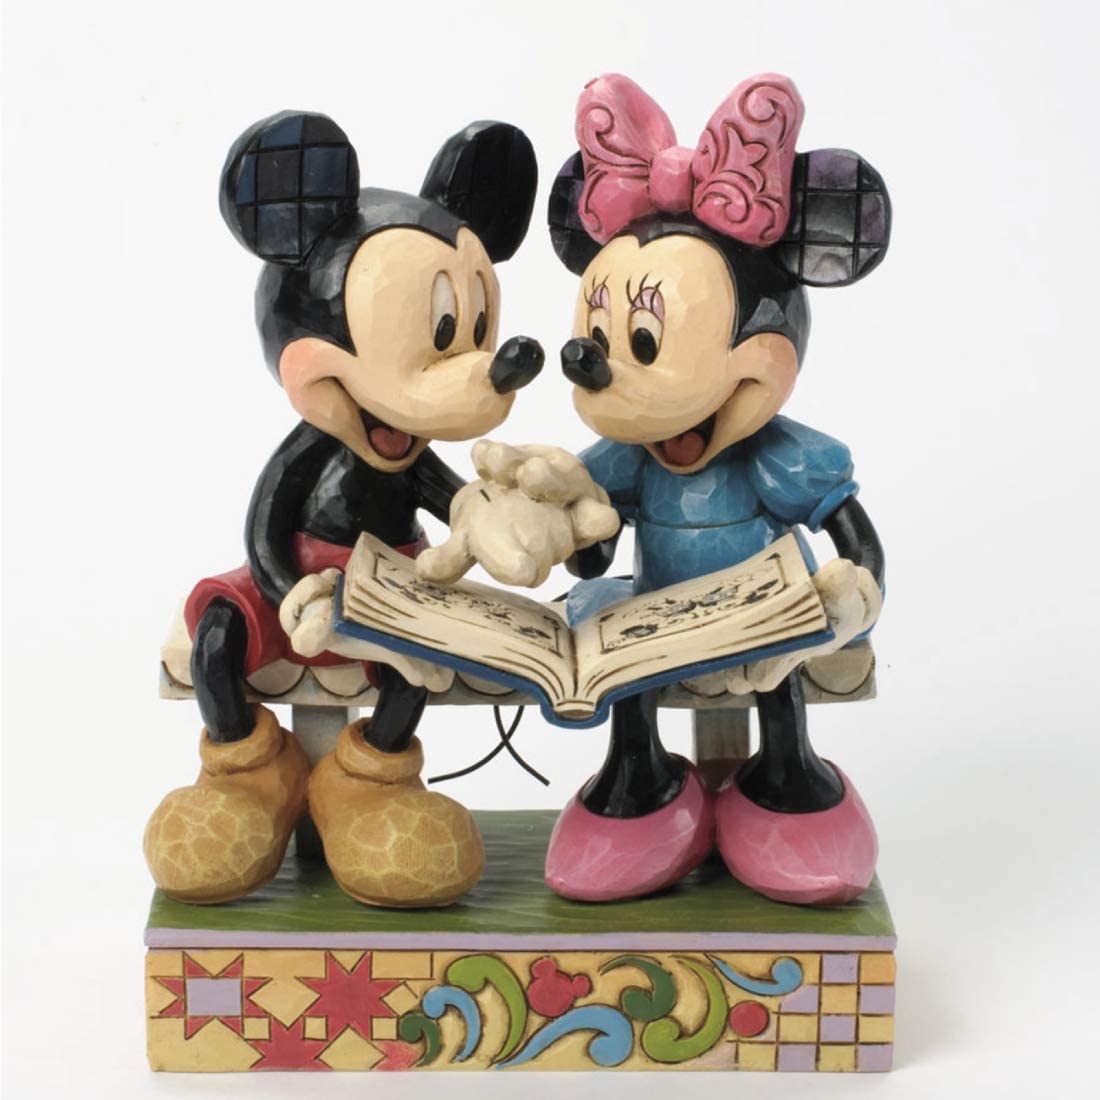 Enesco Jim Shore Disney Traditions Mickey Mouse Minnie Mouse 85th Anni. Reading Collection Figure